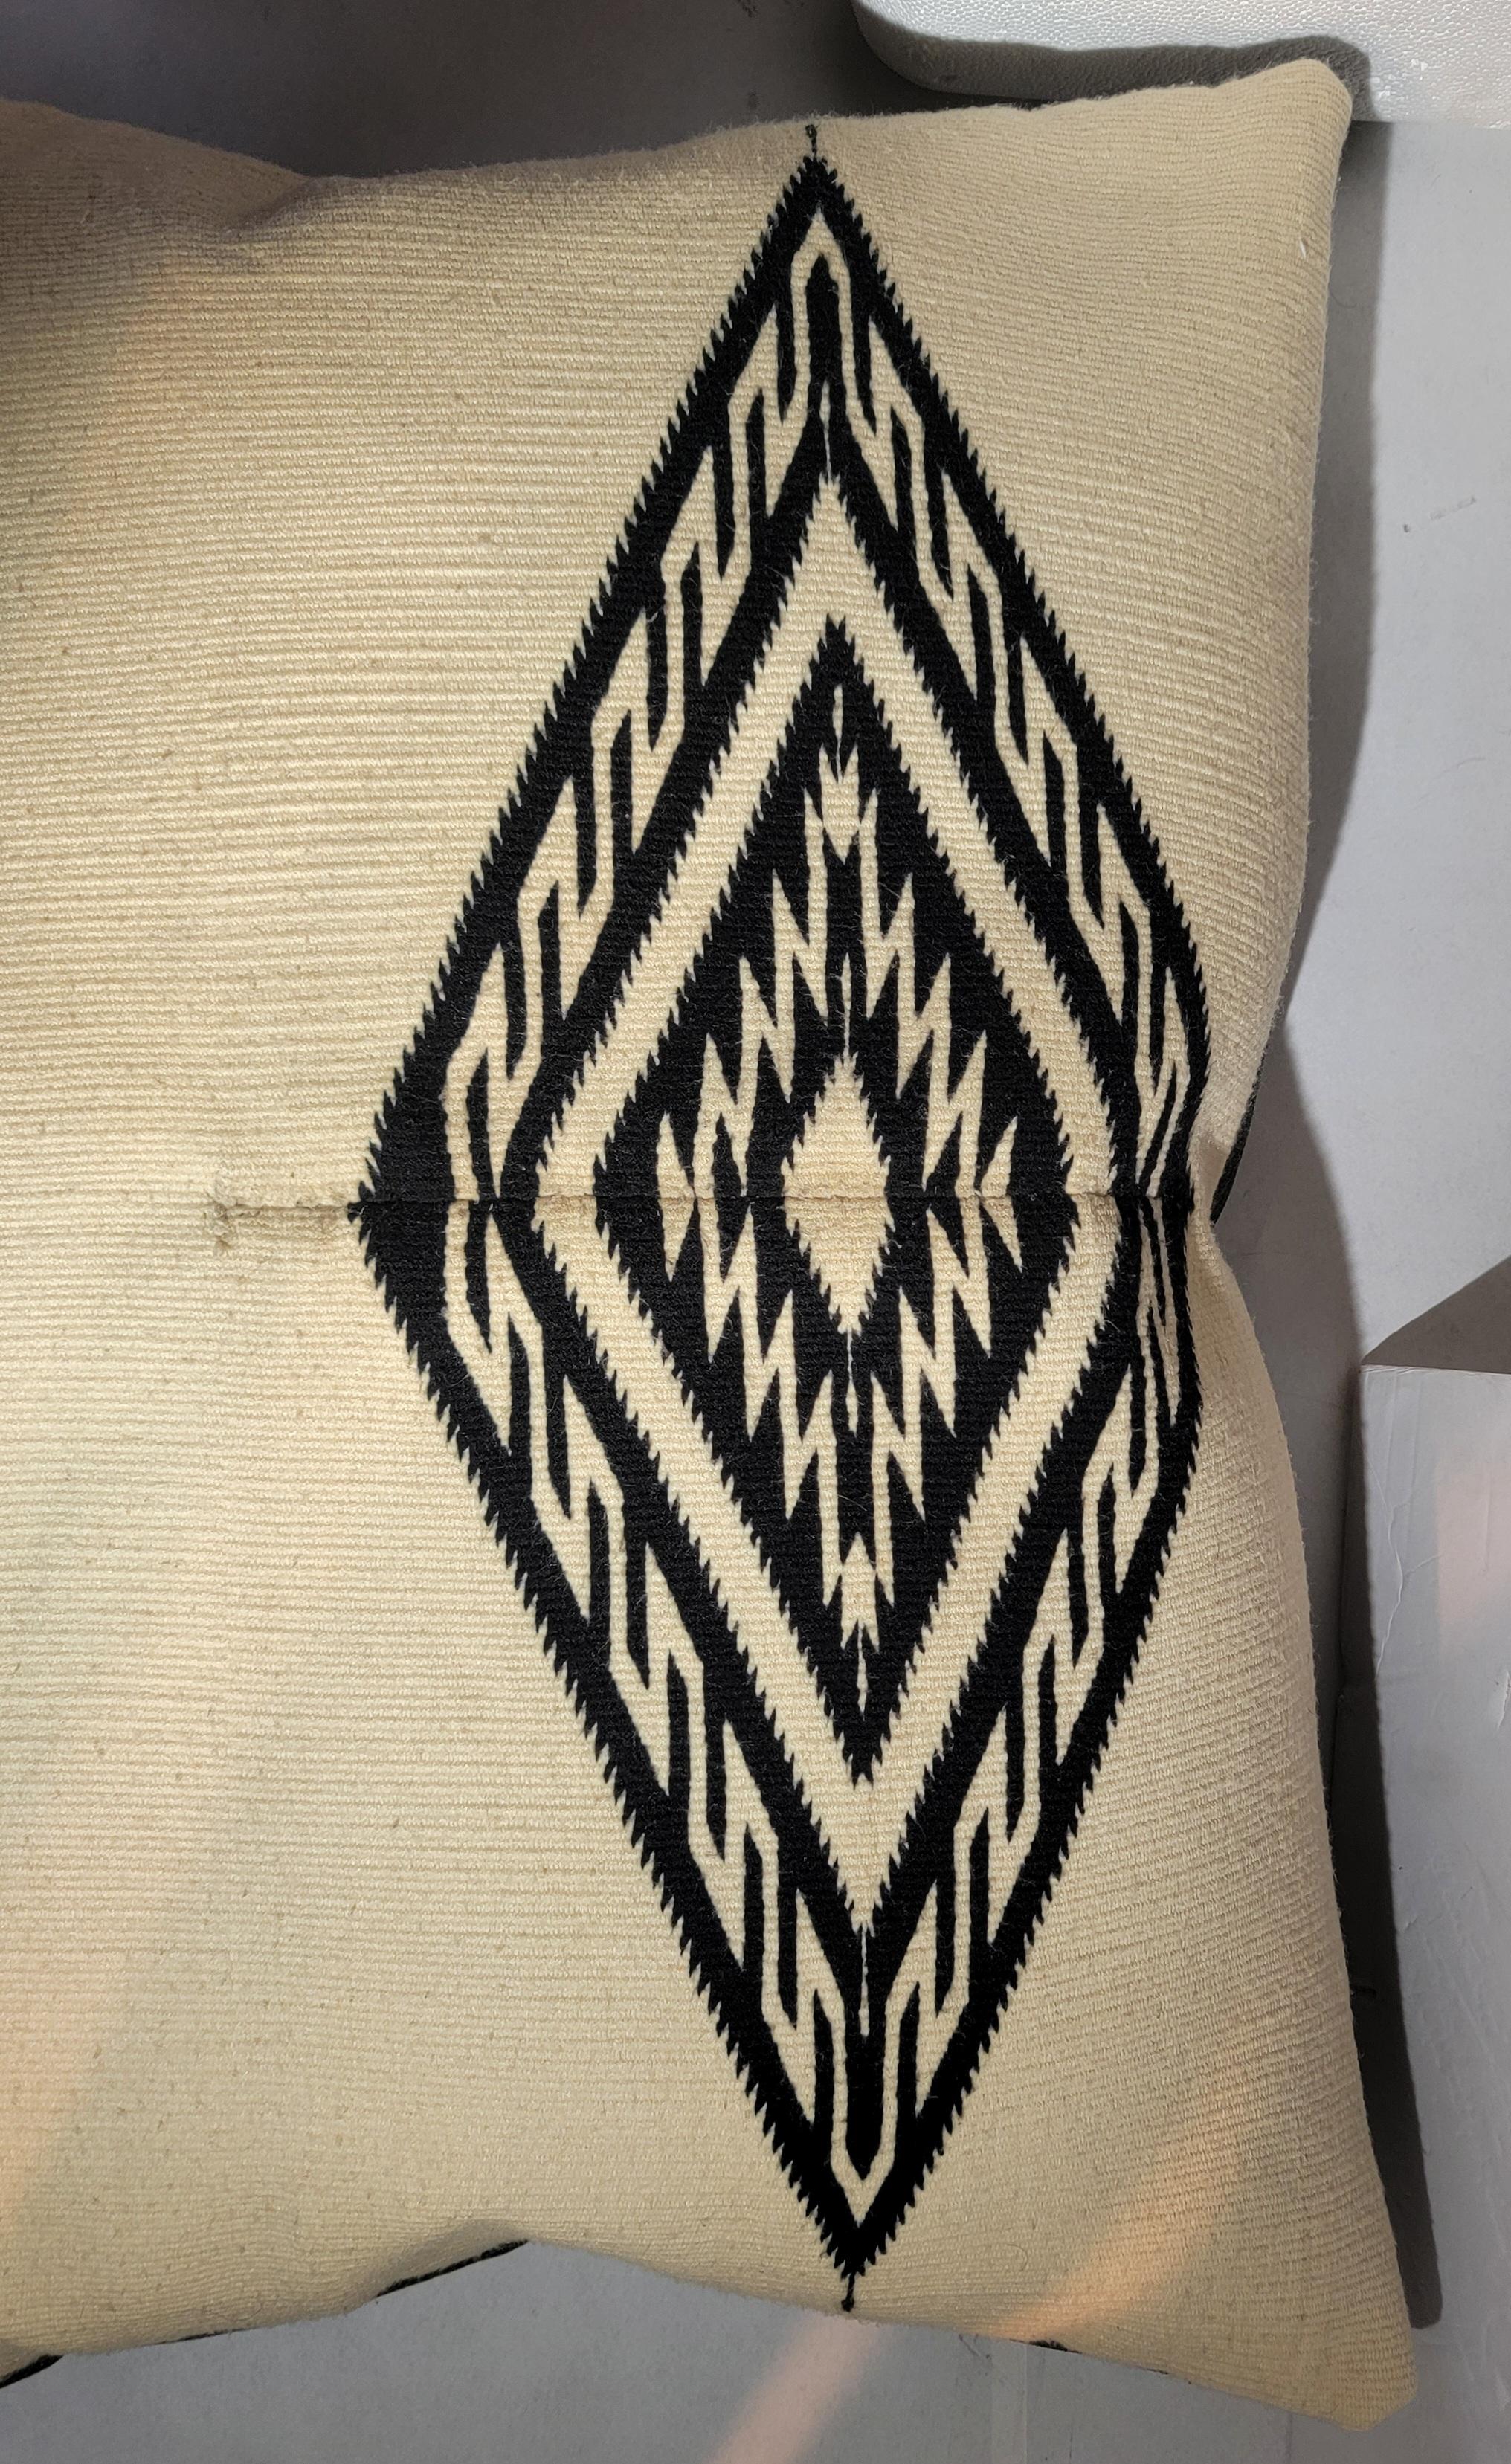 Large Hand made Mexican Indian Weaving pillow with black linen backing. 
Wonderful large sized woven wool pillow that states 